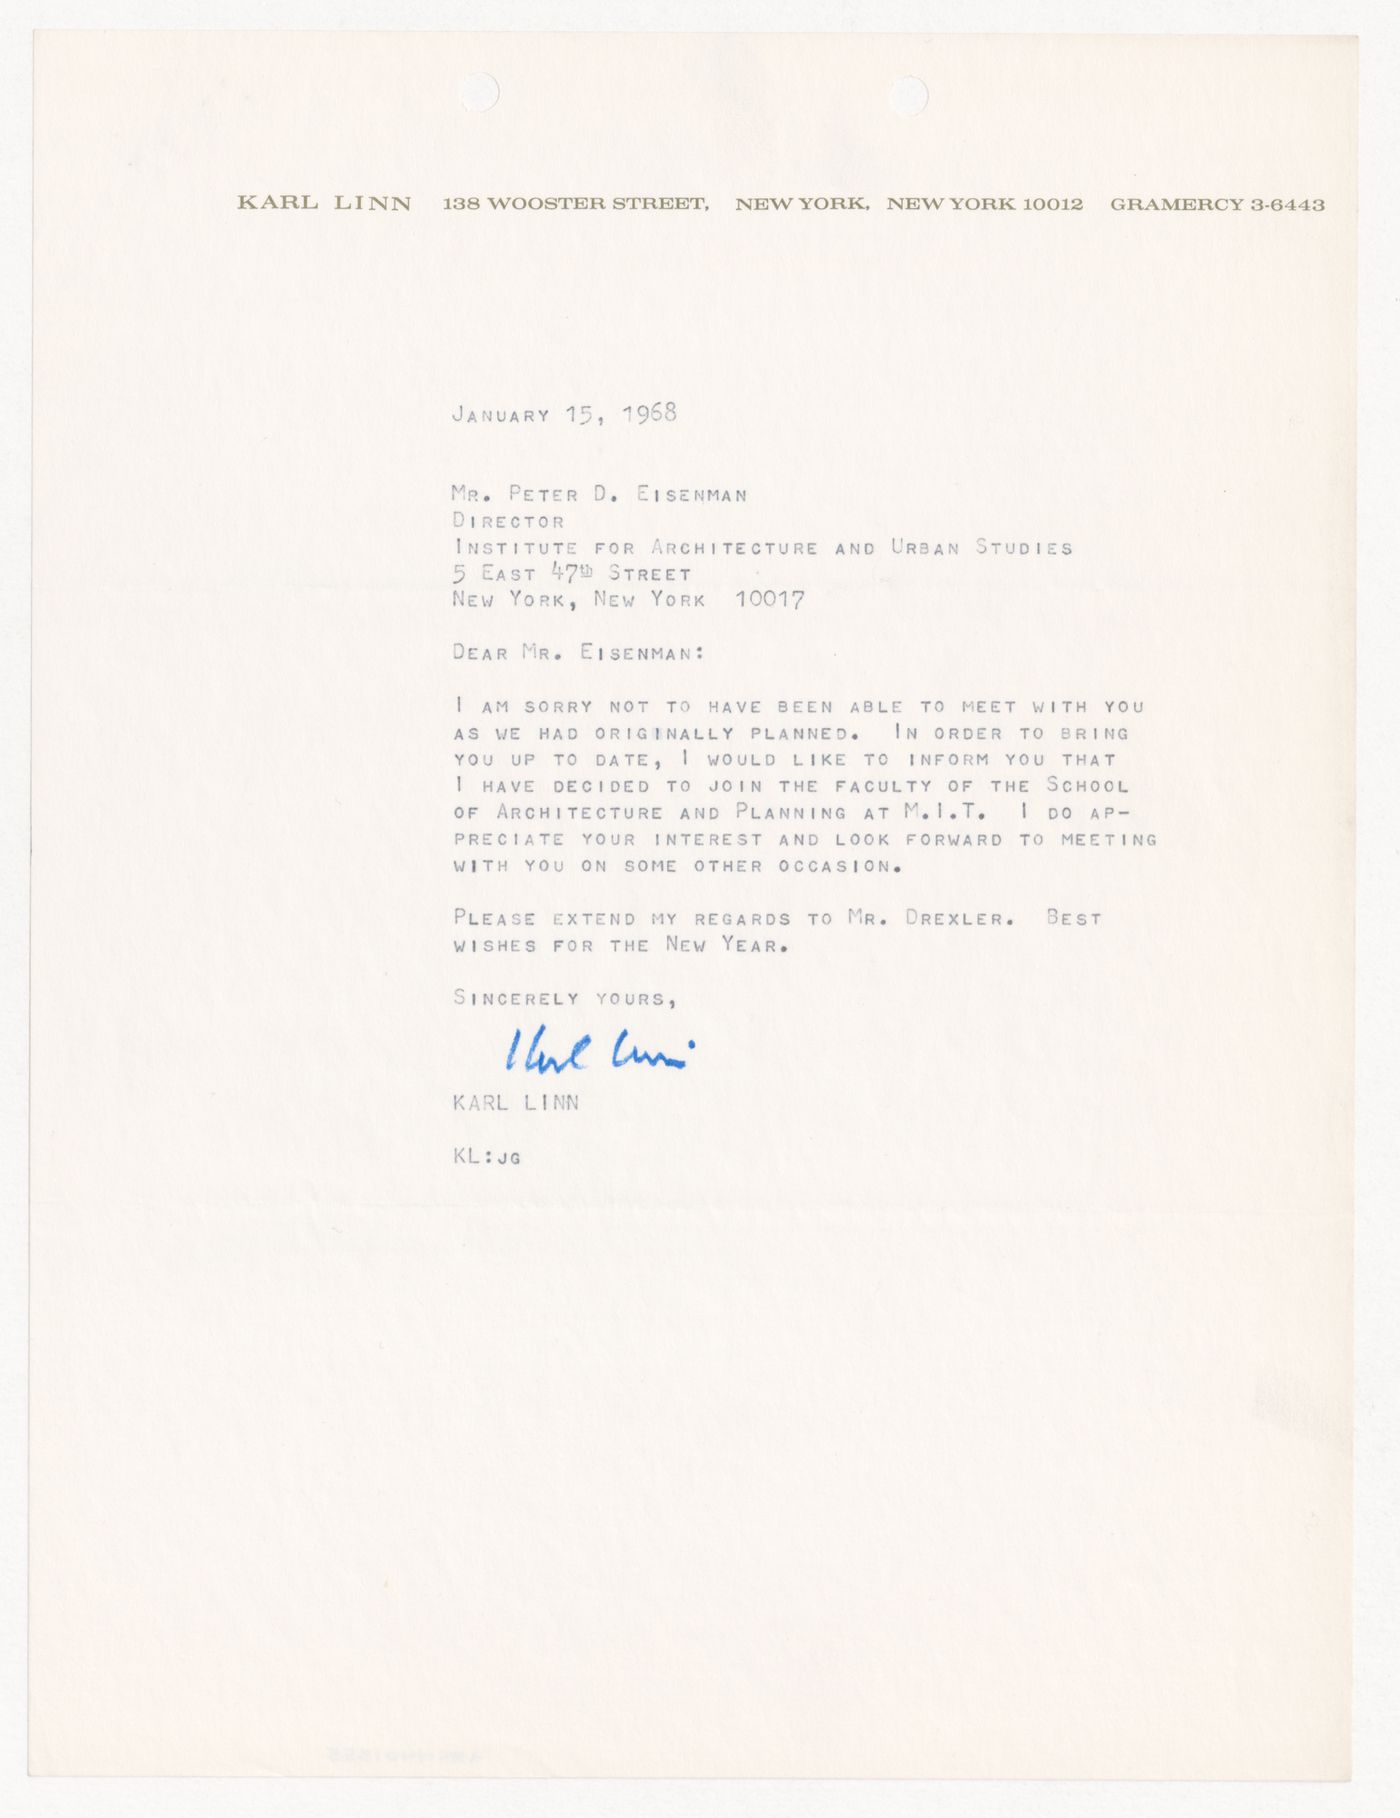 Letter from Karl Linn to Peter D. Eisenman about Linn joining the faculty at the Massachusetts Institute of Technology (M.I.T.)